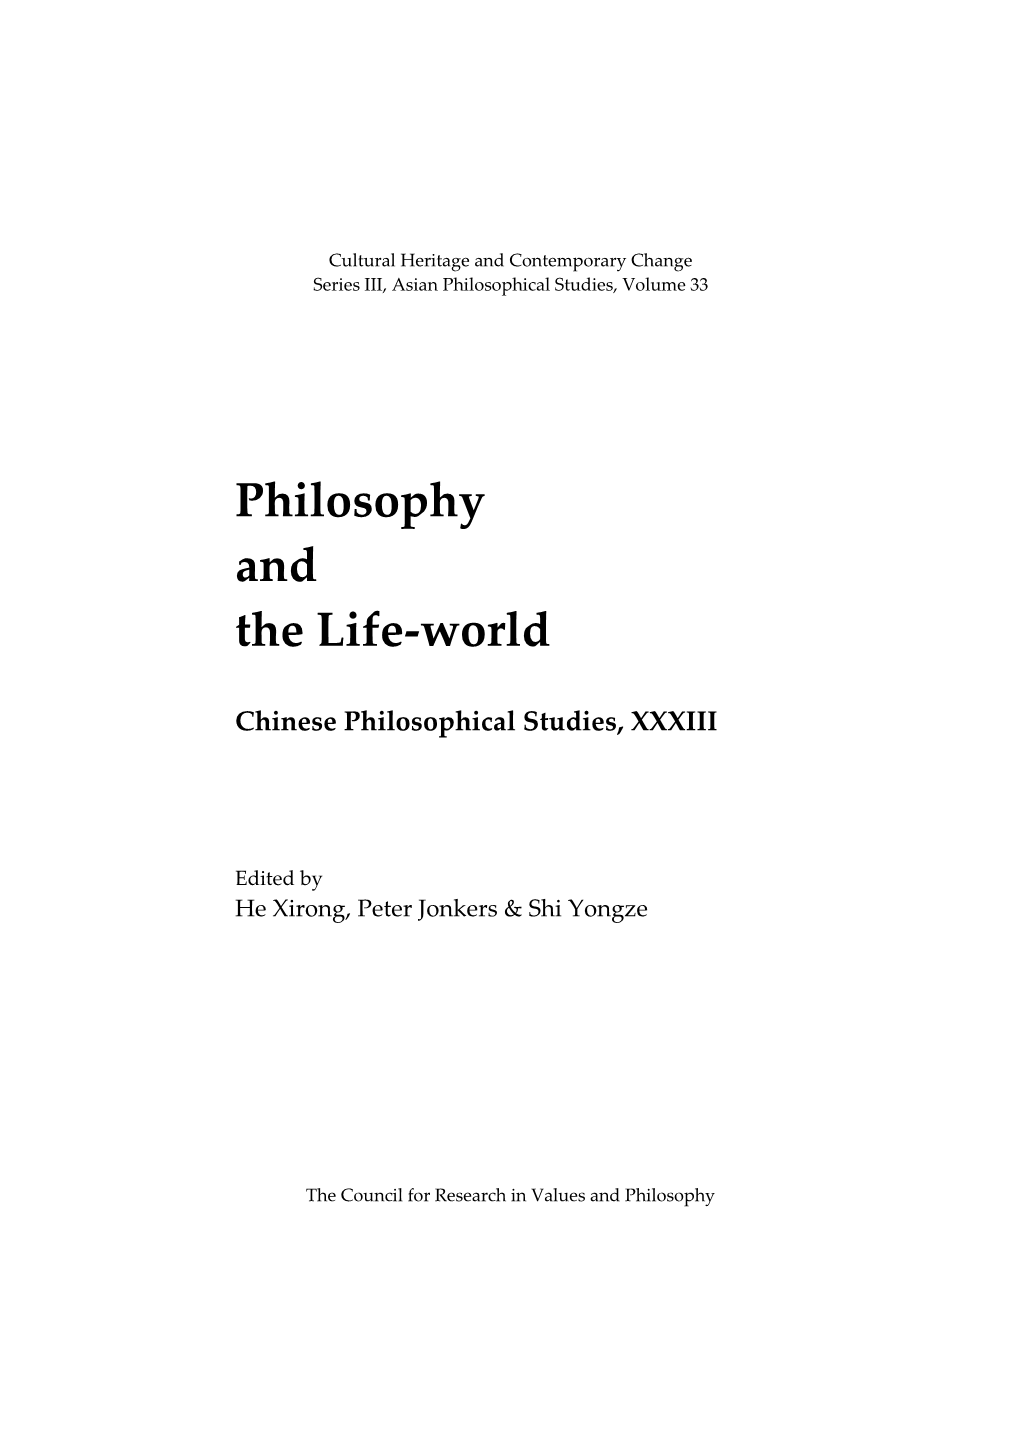 Philosophy and the Life-World: Chinese Philosophical Studies, XXXIII